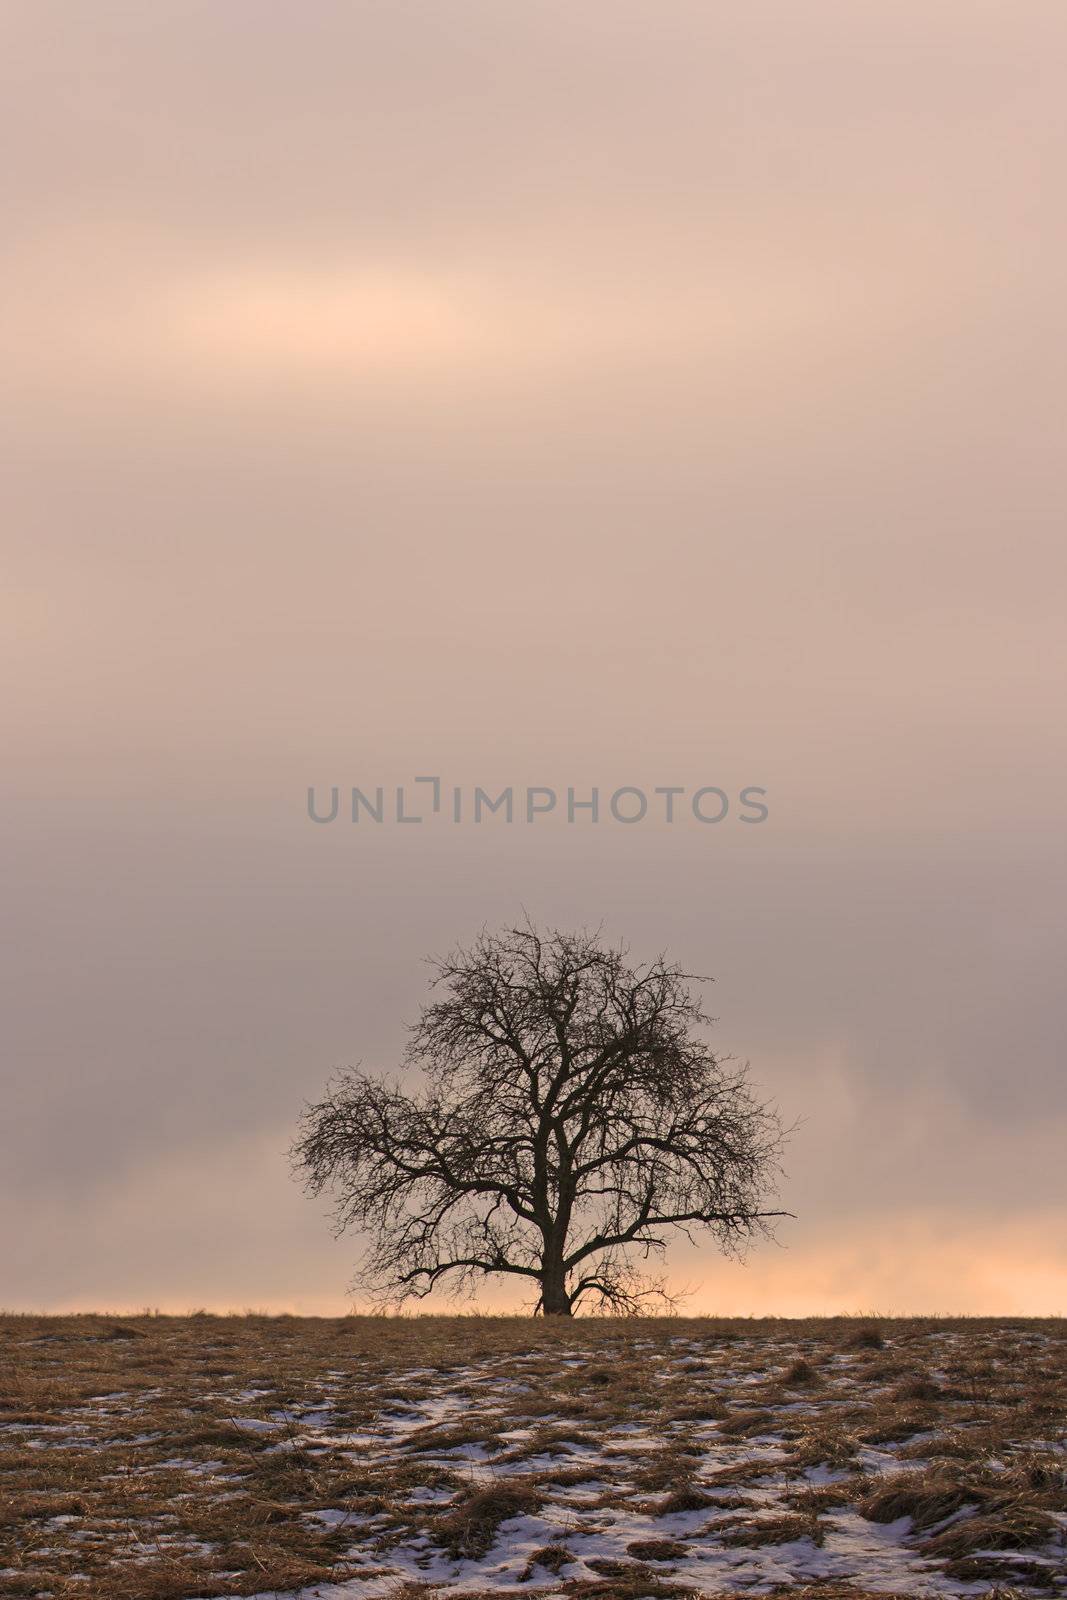 This is a photography of a lonely naked tree